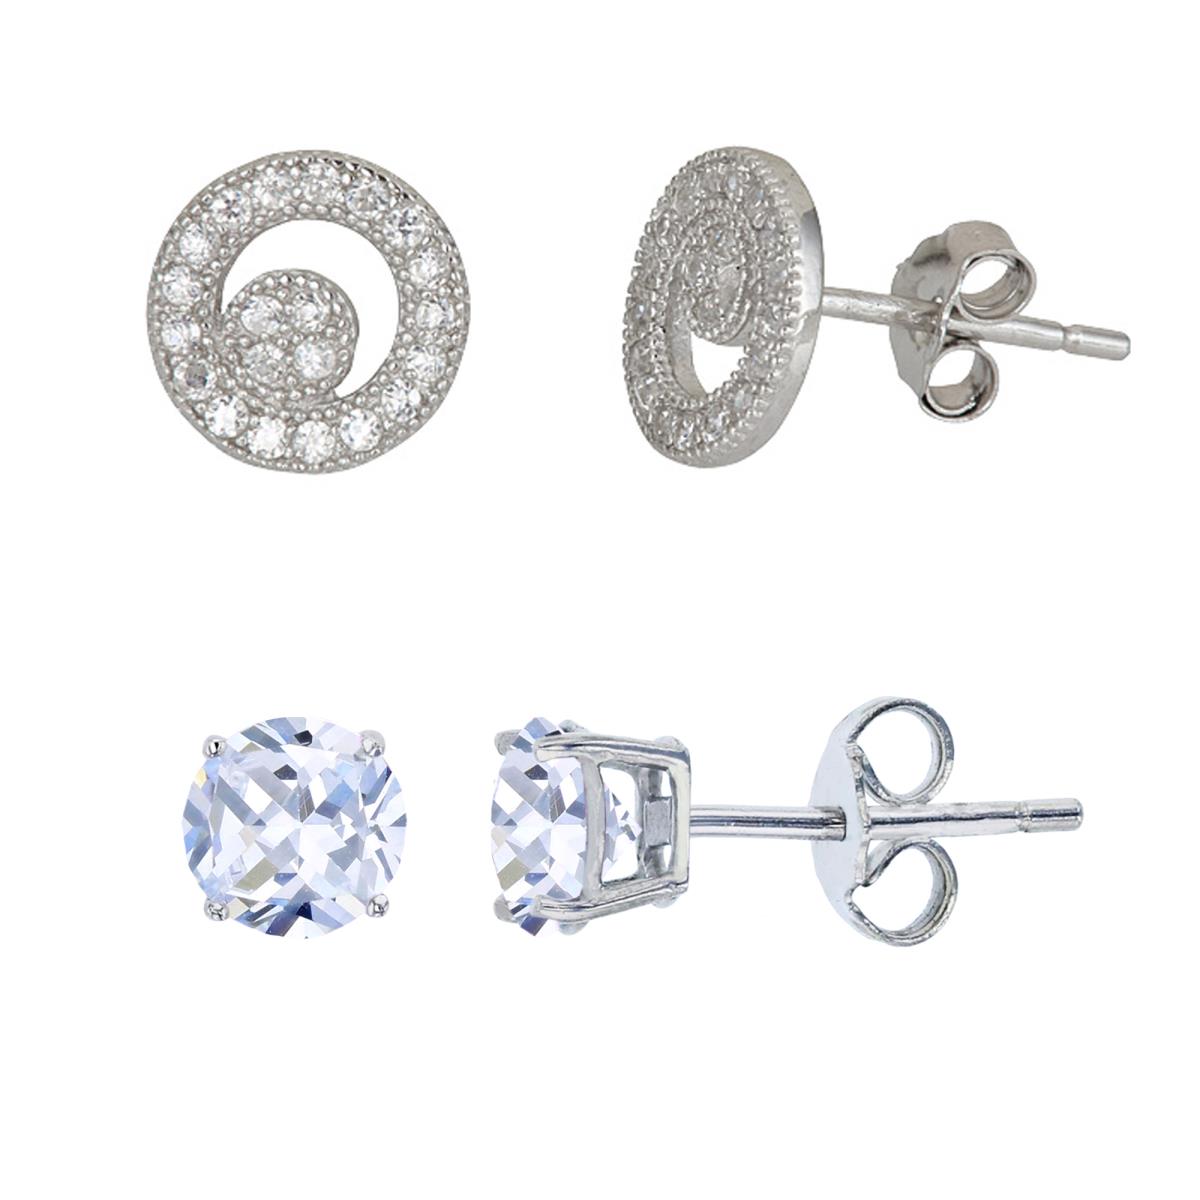 Sterling Silver Micropave Petite Round & 5mm Round Solitaire Stud Earring Set